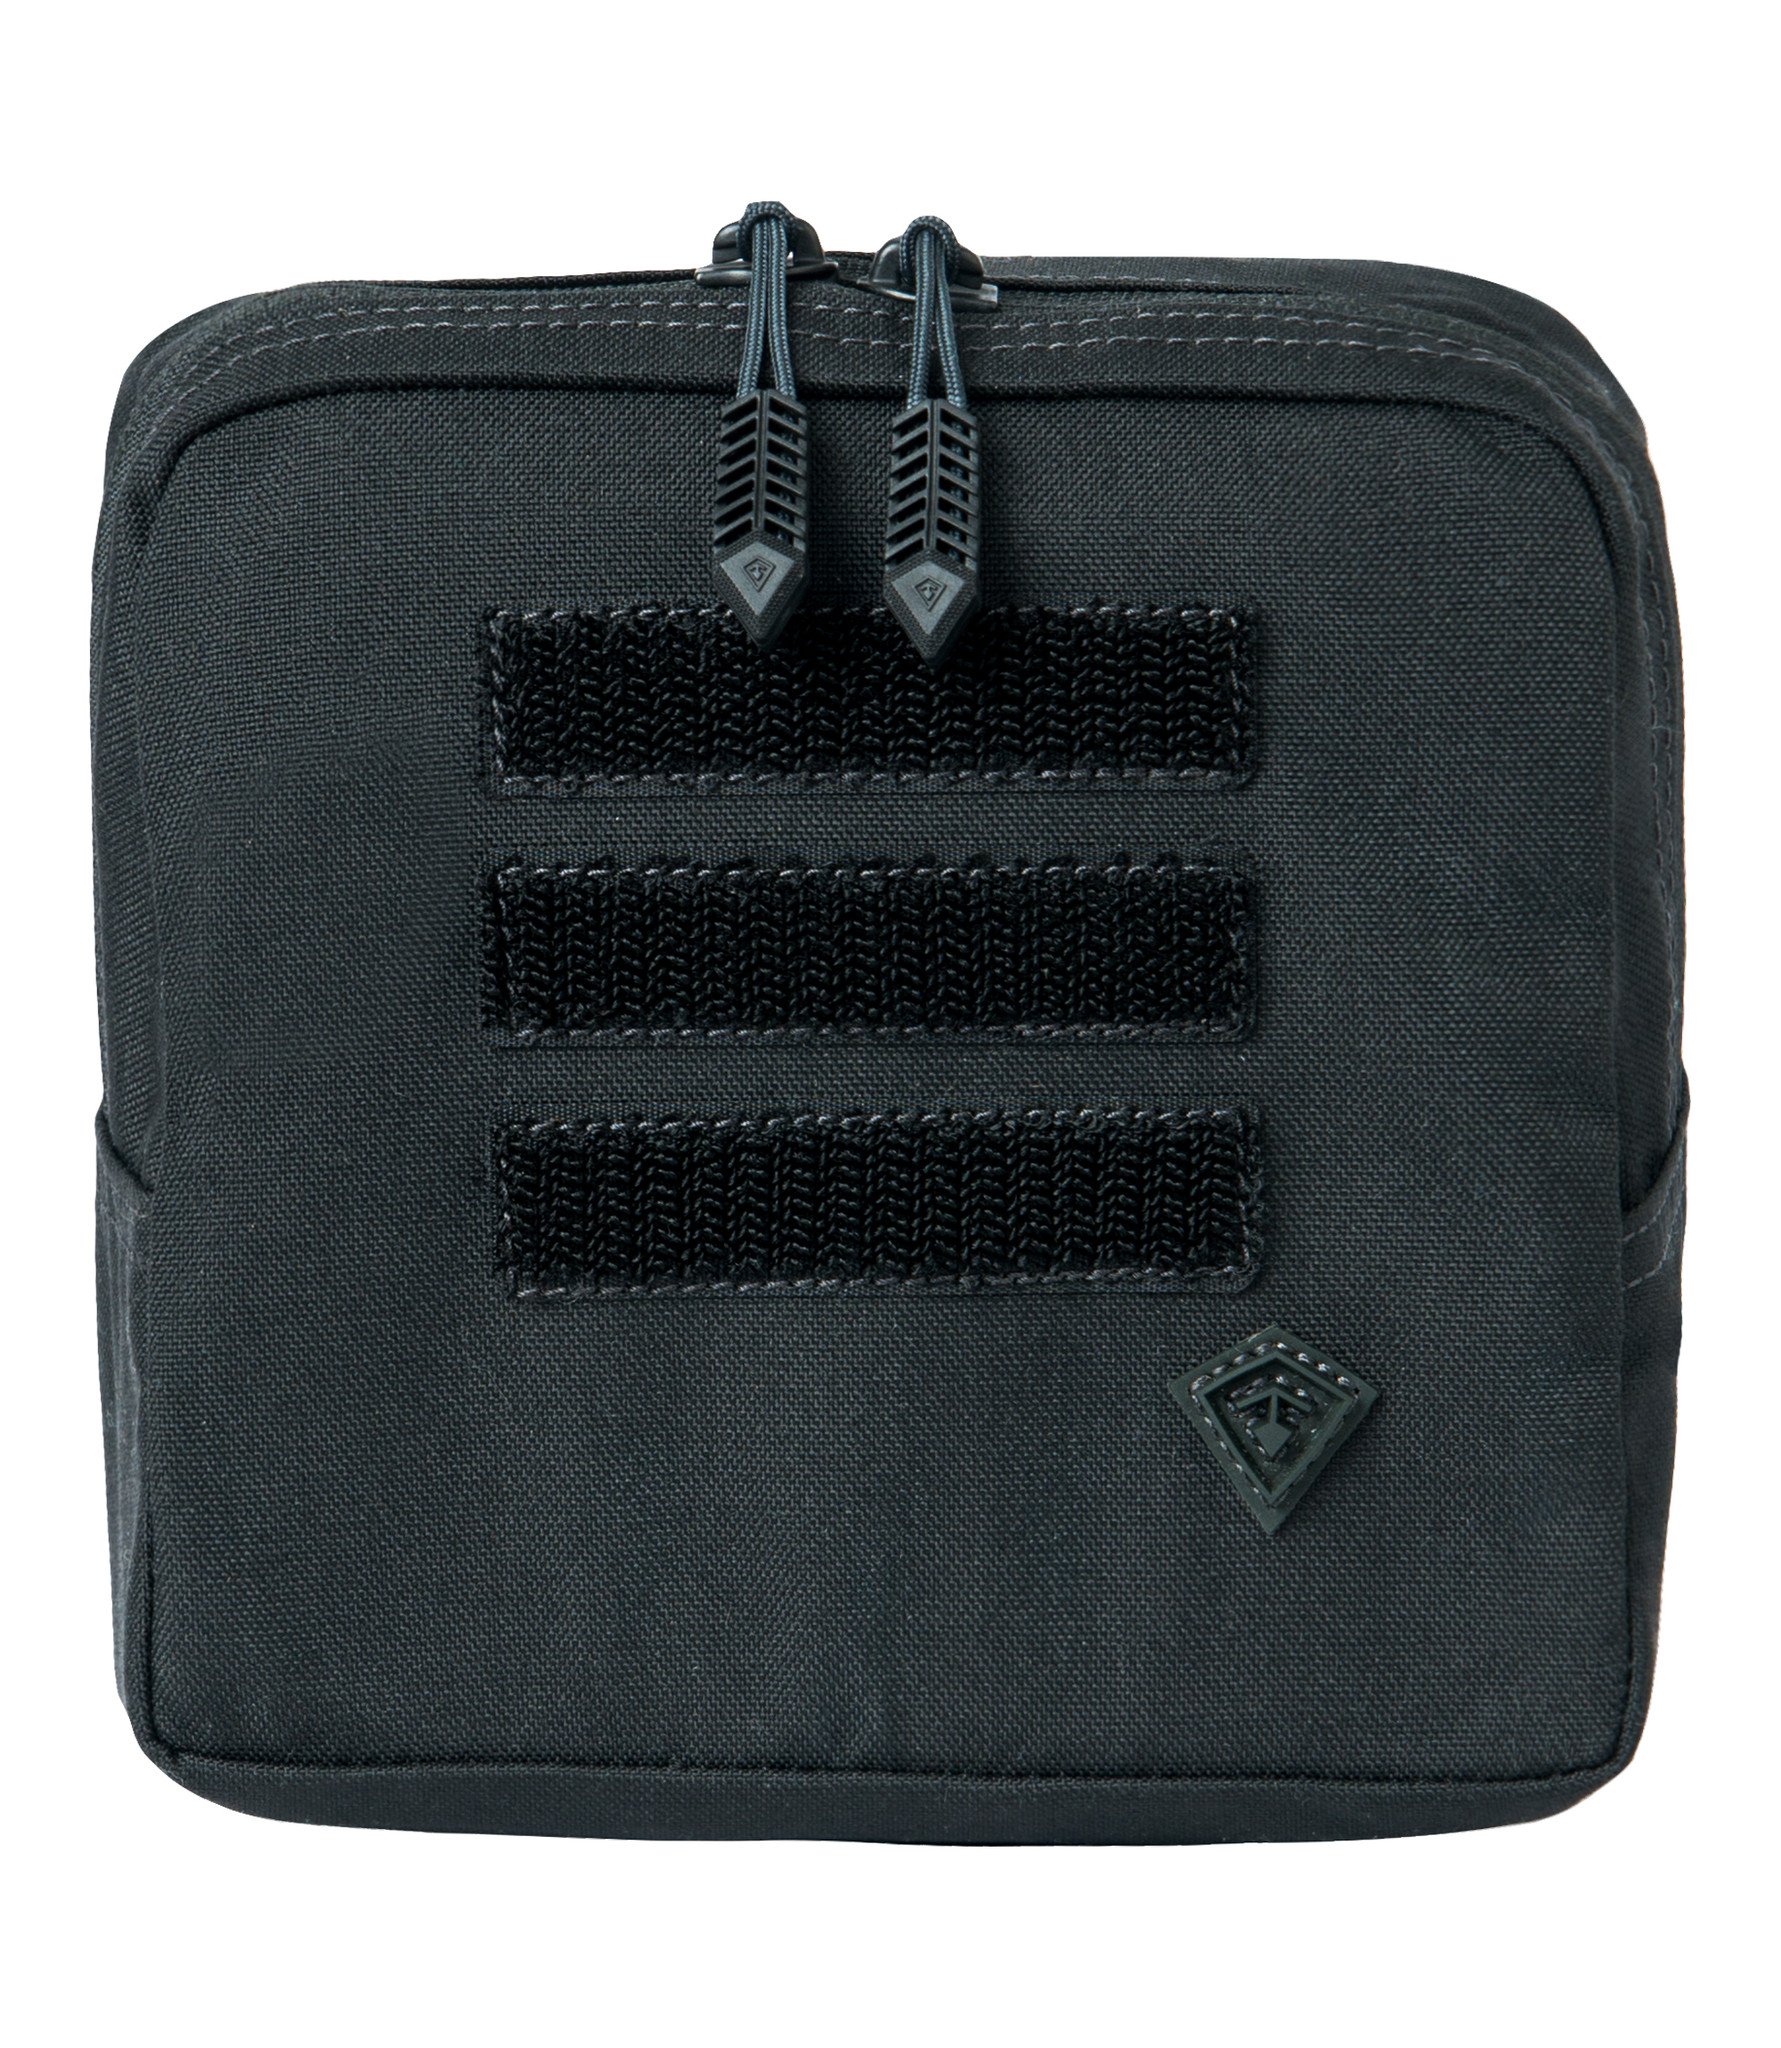 First Tactical Tactix 6X6 Utility Pouch